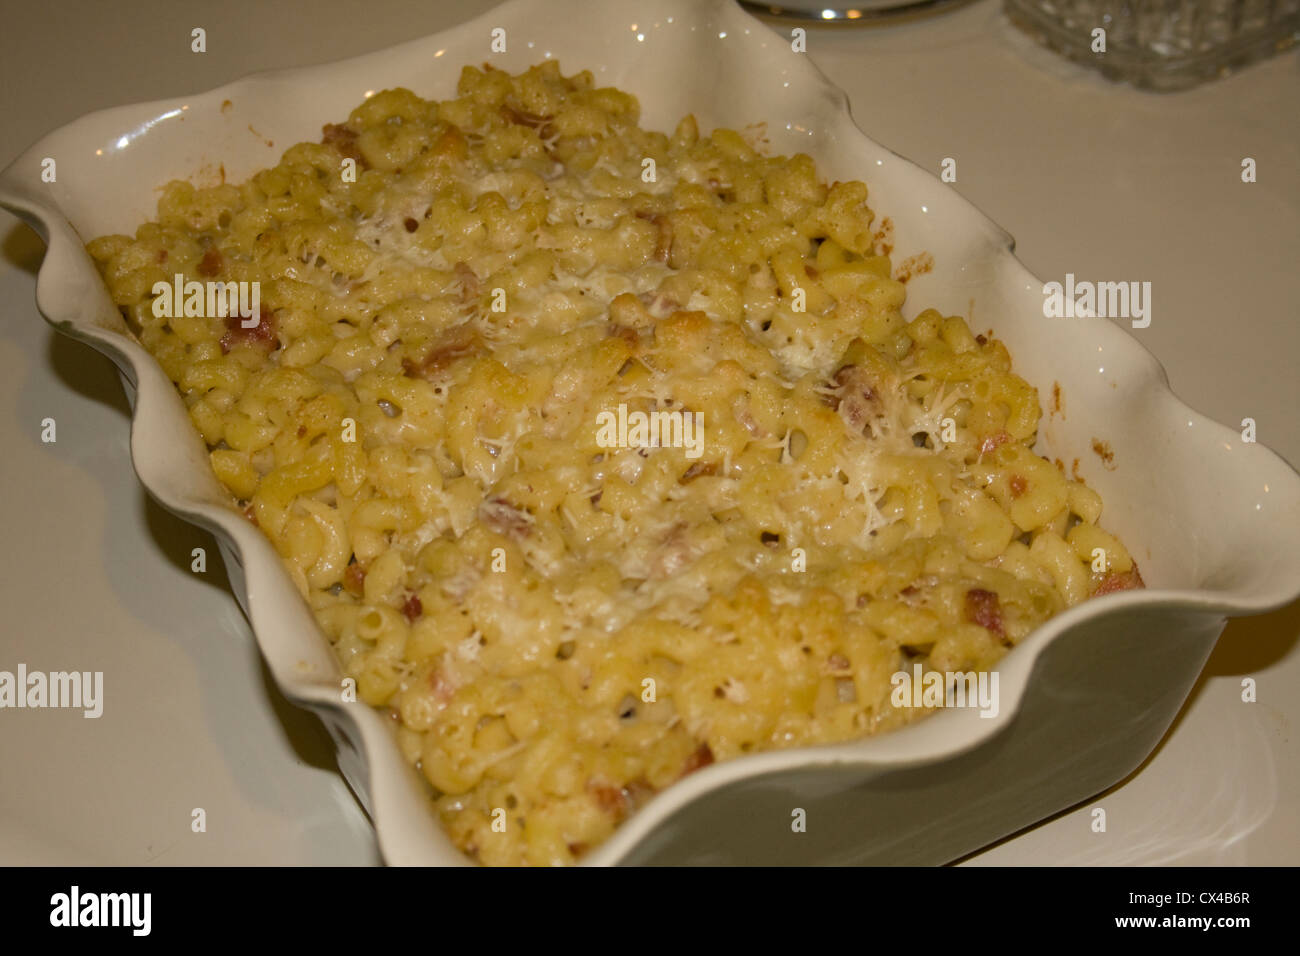 Gourmet macaroni and cheese, ready to be placed into the oven for baking. Stock Photo